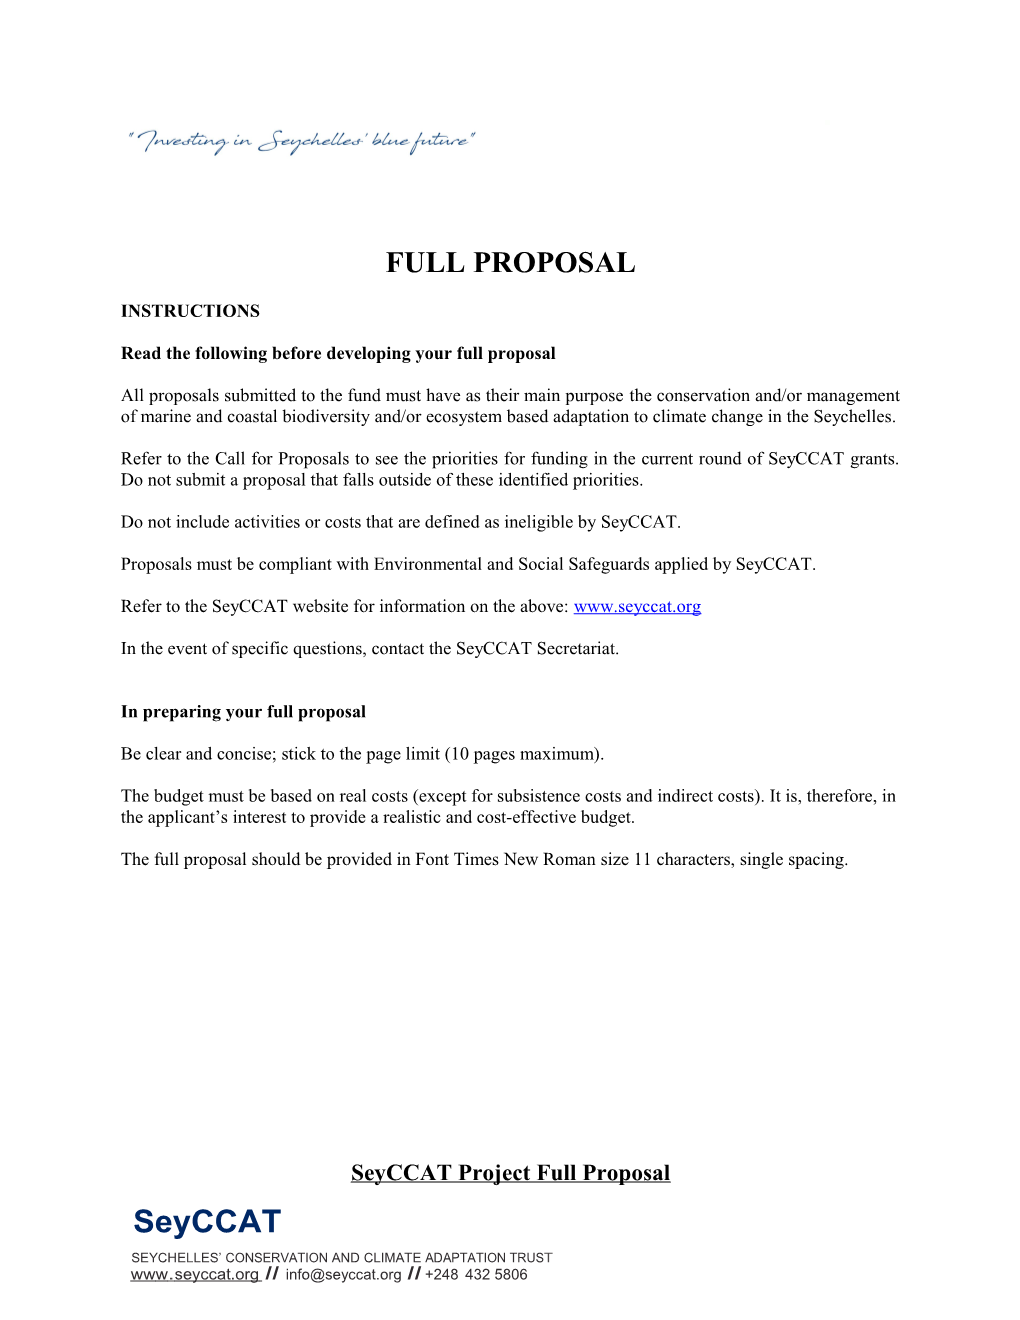 Read the Following Before Developing Your Full Proposal